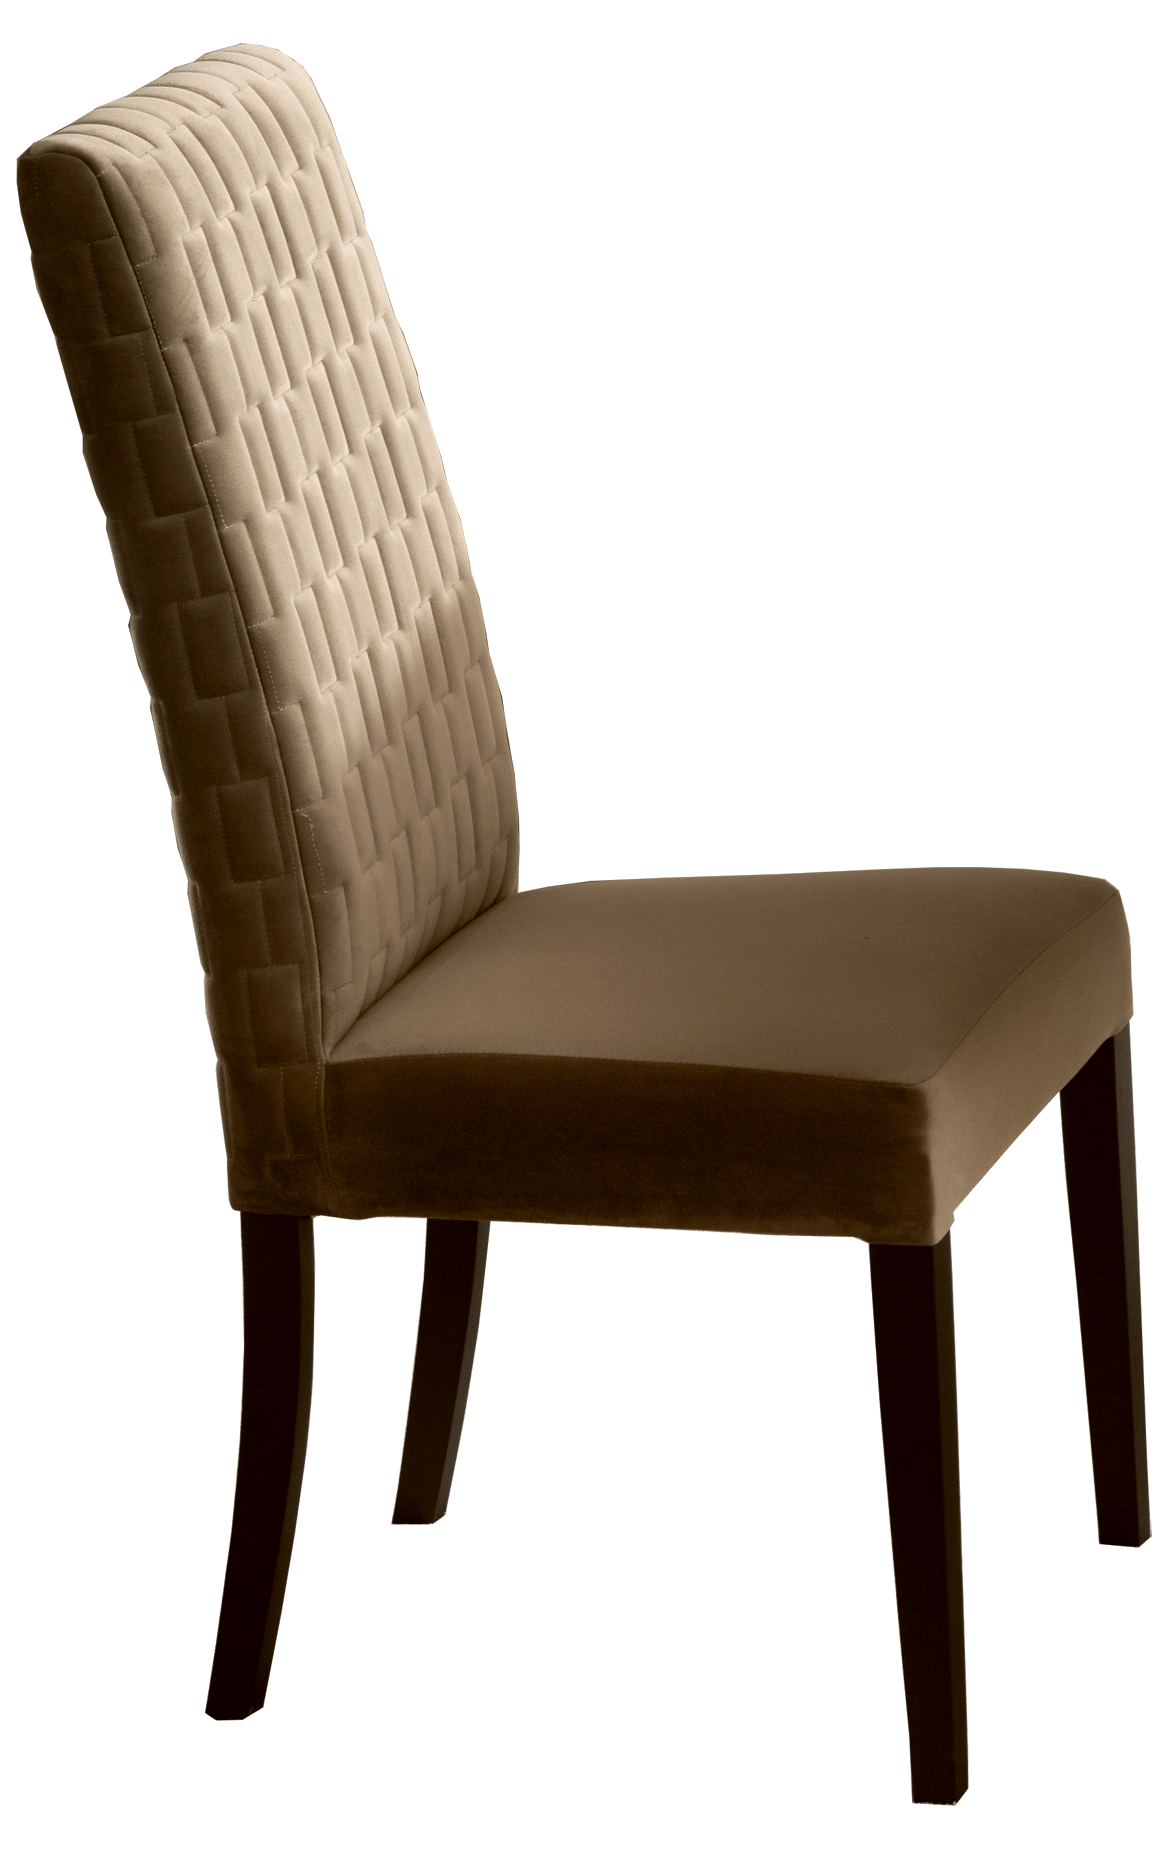 Brands Camel Modum Collection, Italy Poesia Dining Chair by Arredoclassic